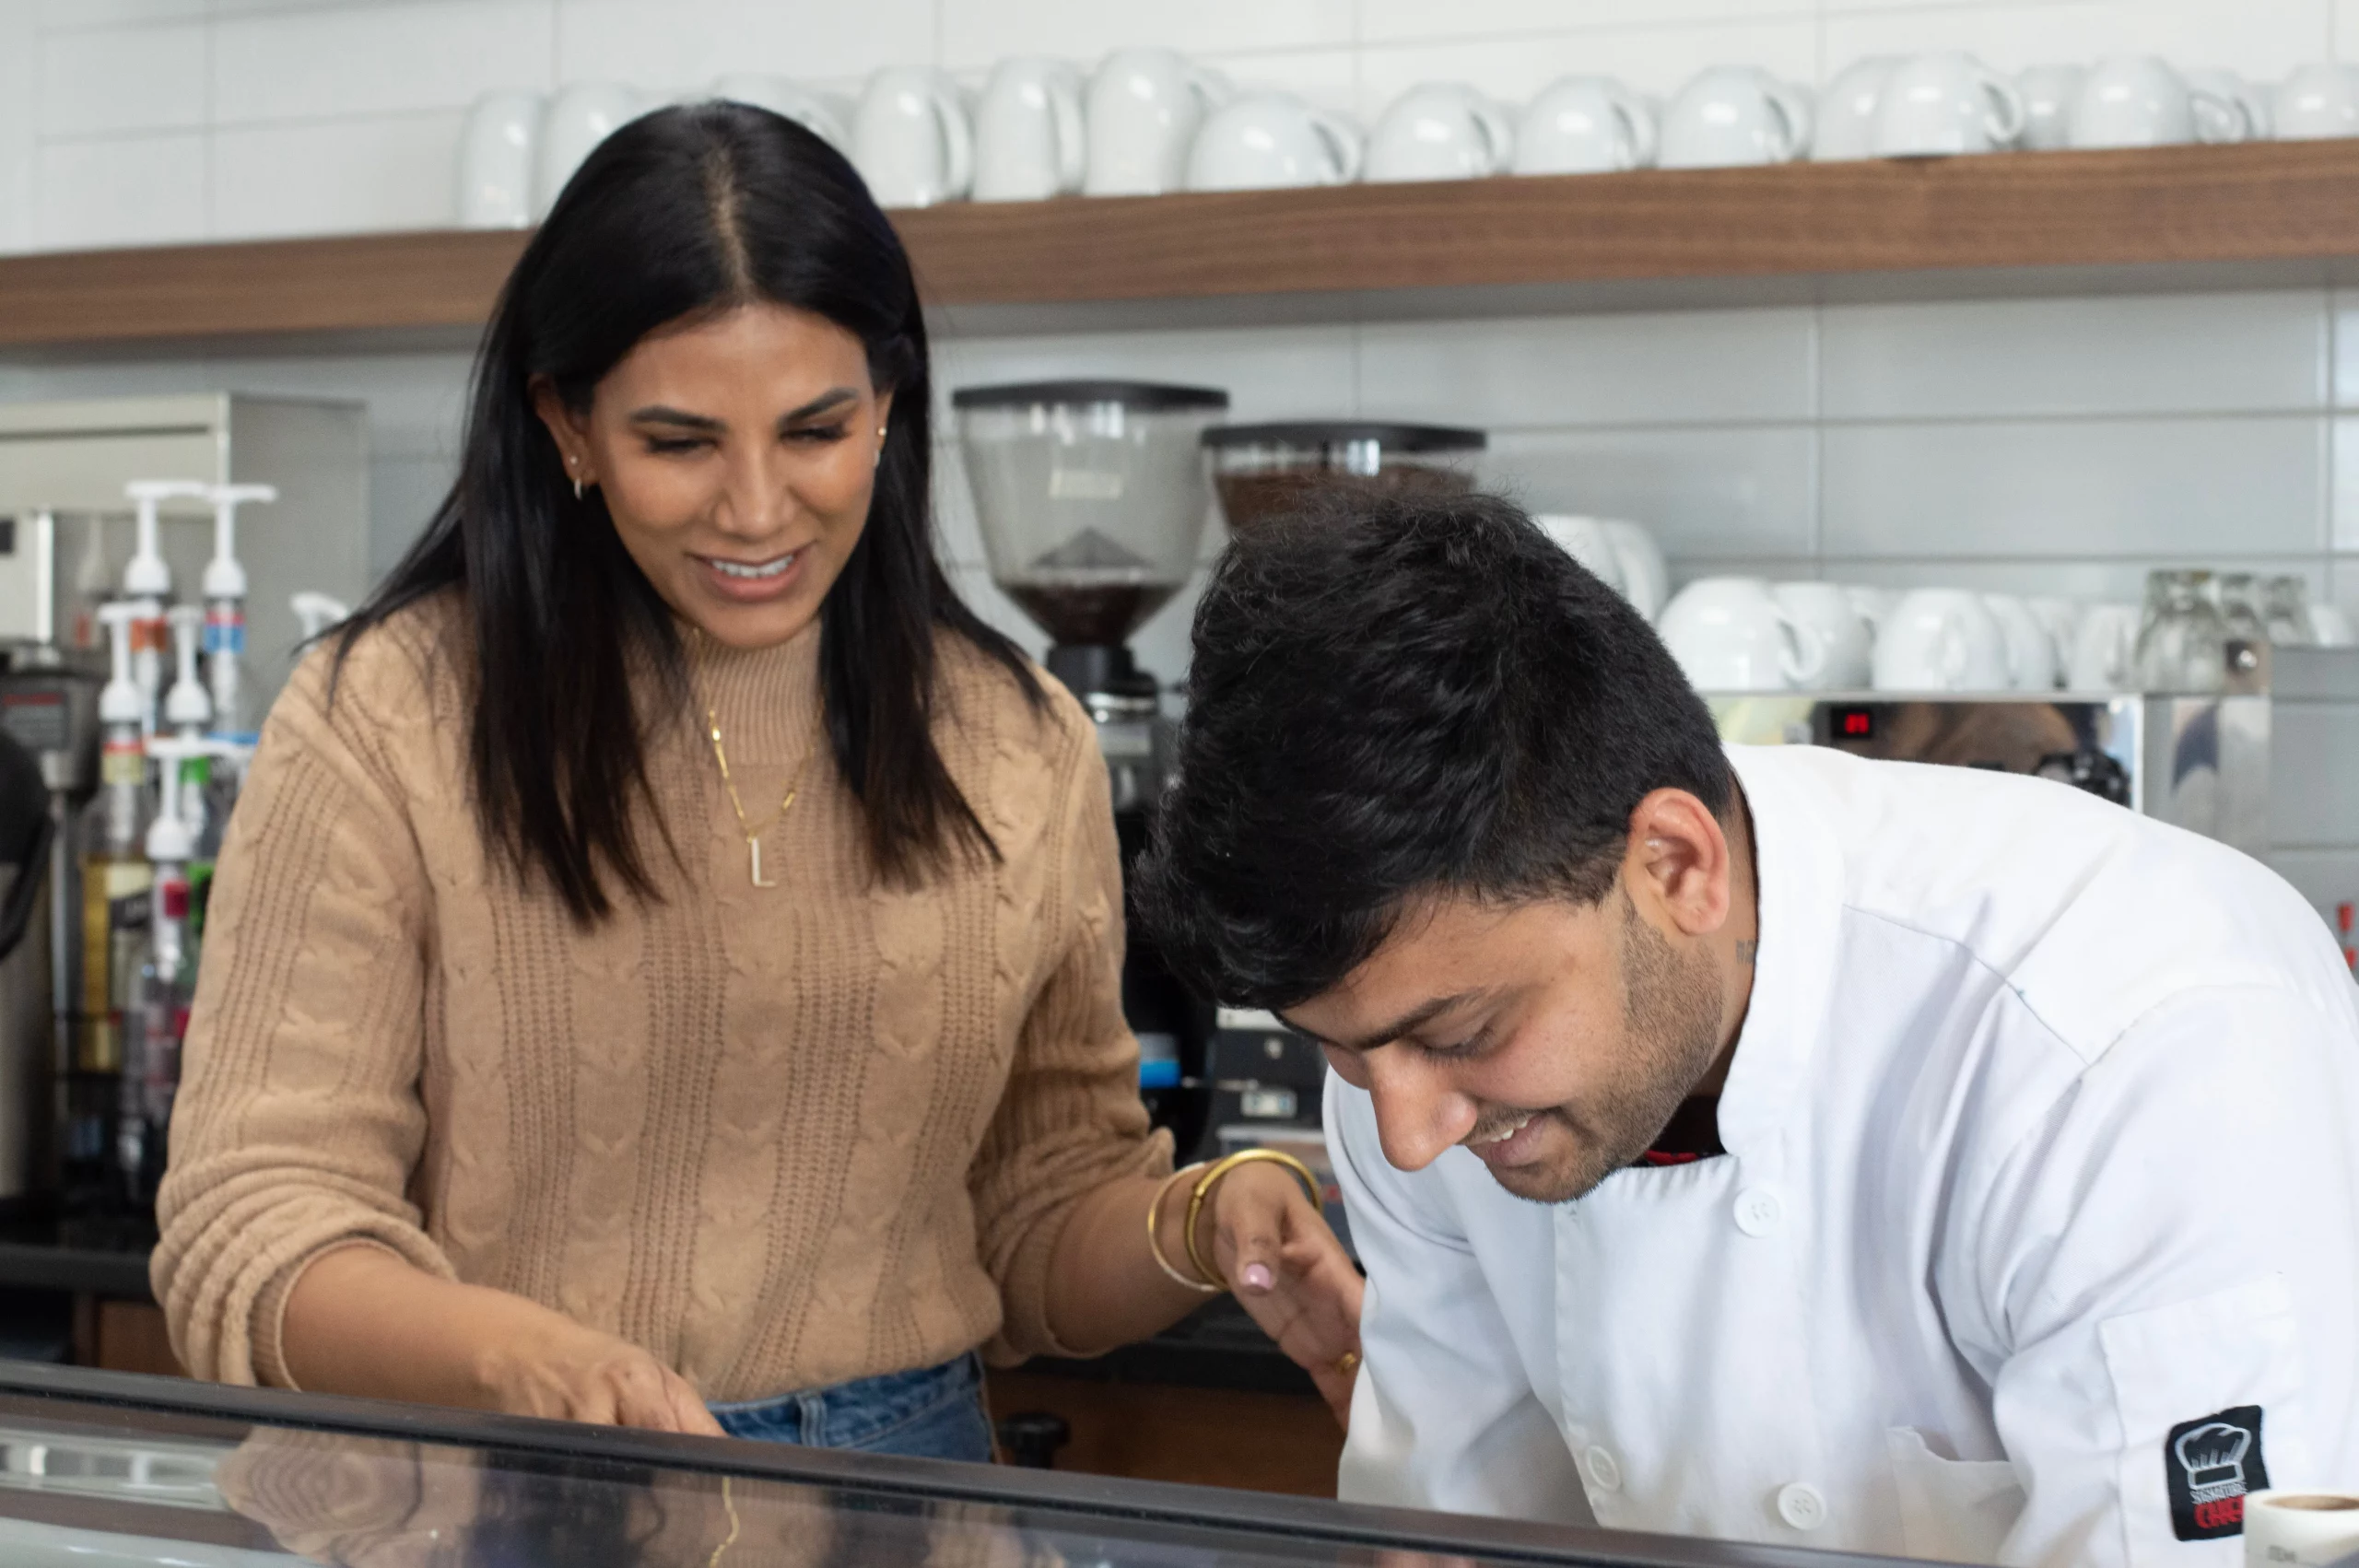 Lavanya Mahate and a chef smile while working in a kitchen together.